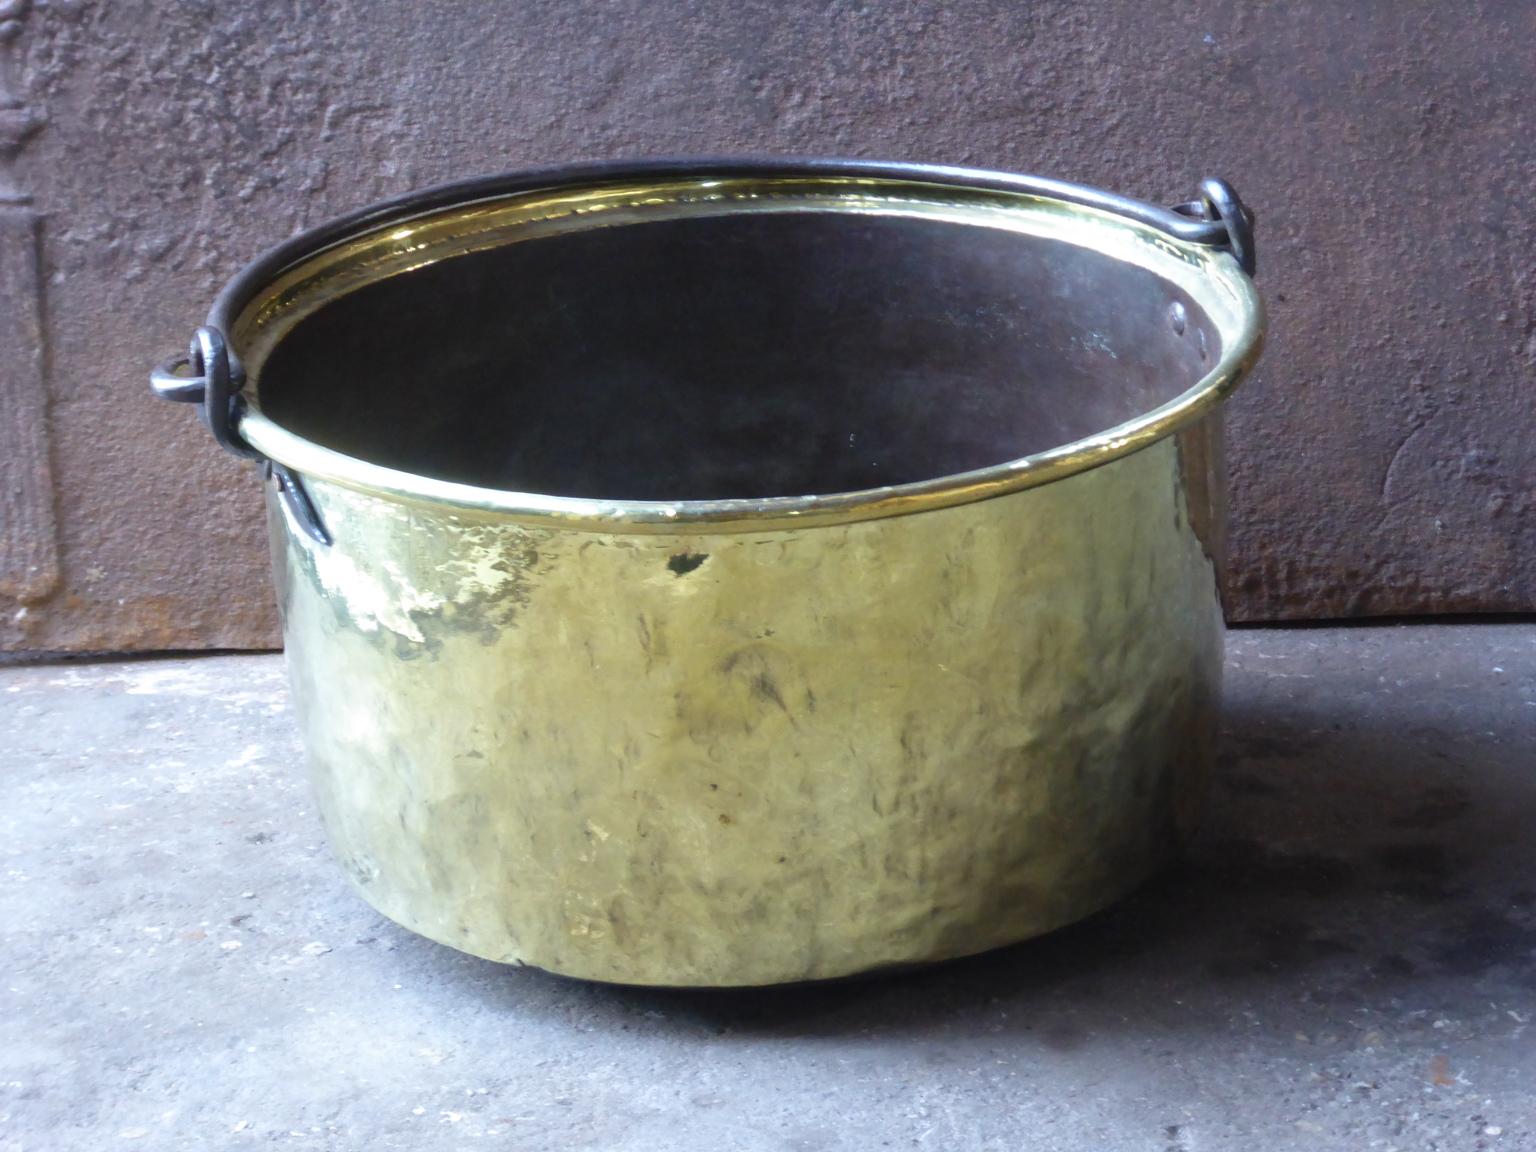 18th century Dutch log bin firewood bucket made of polished brass and wrought iron. Dutch brass kettle, also called 'aker'. Used to draw water from the well and cook over an open fire.